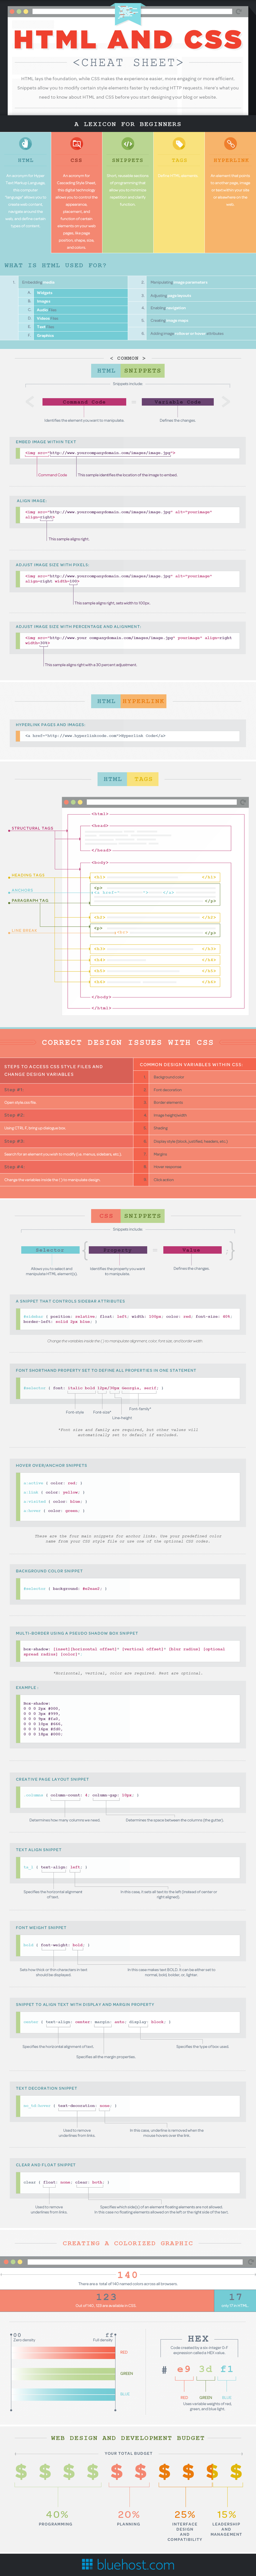 HTML and CSS Cheat Sheet - #infographic